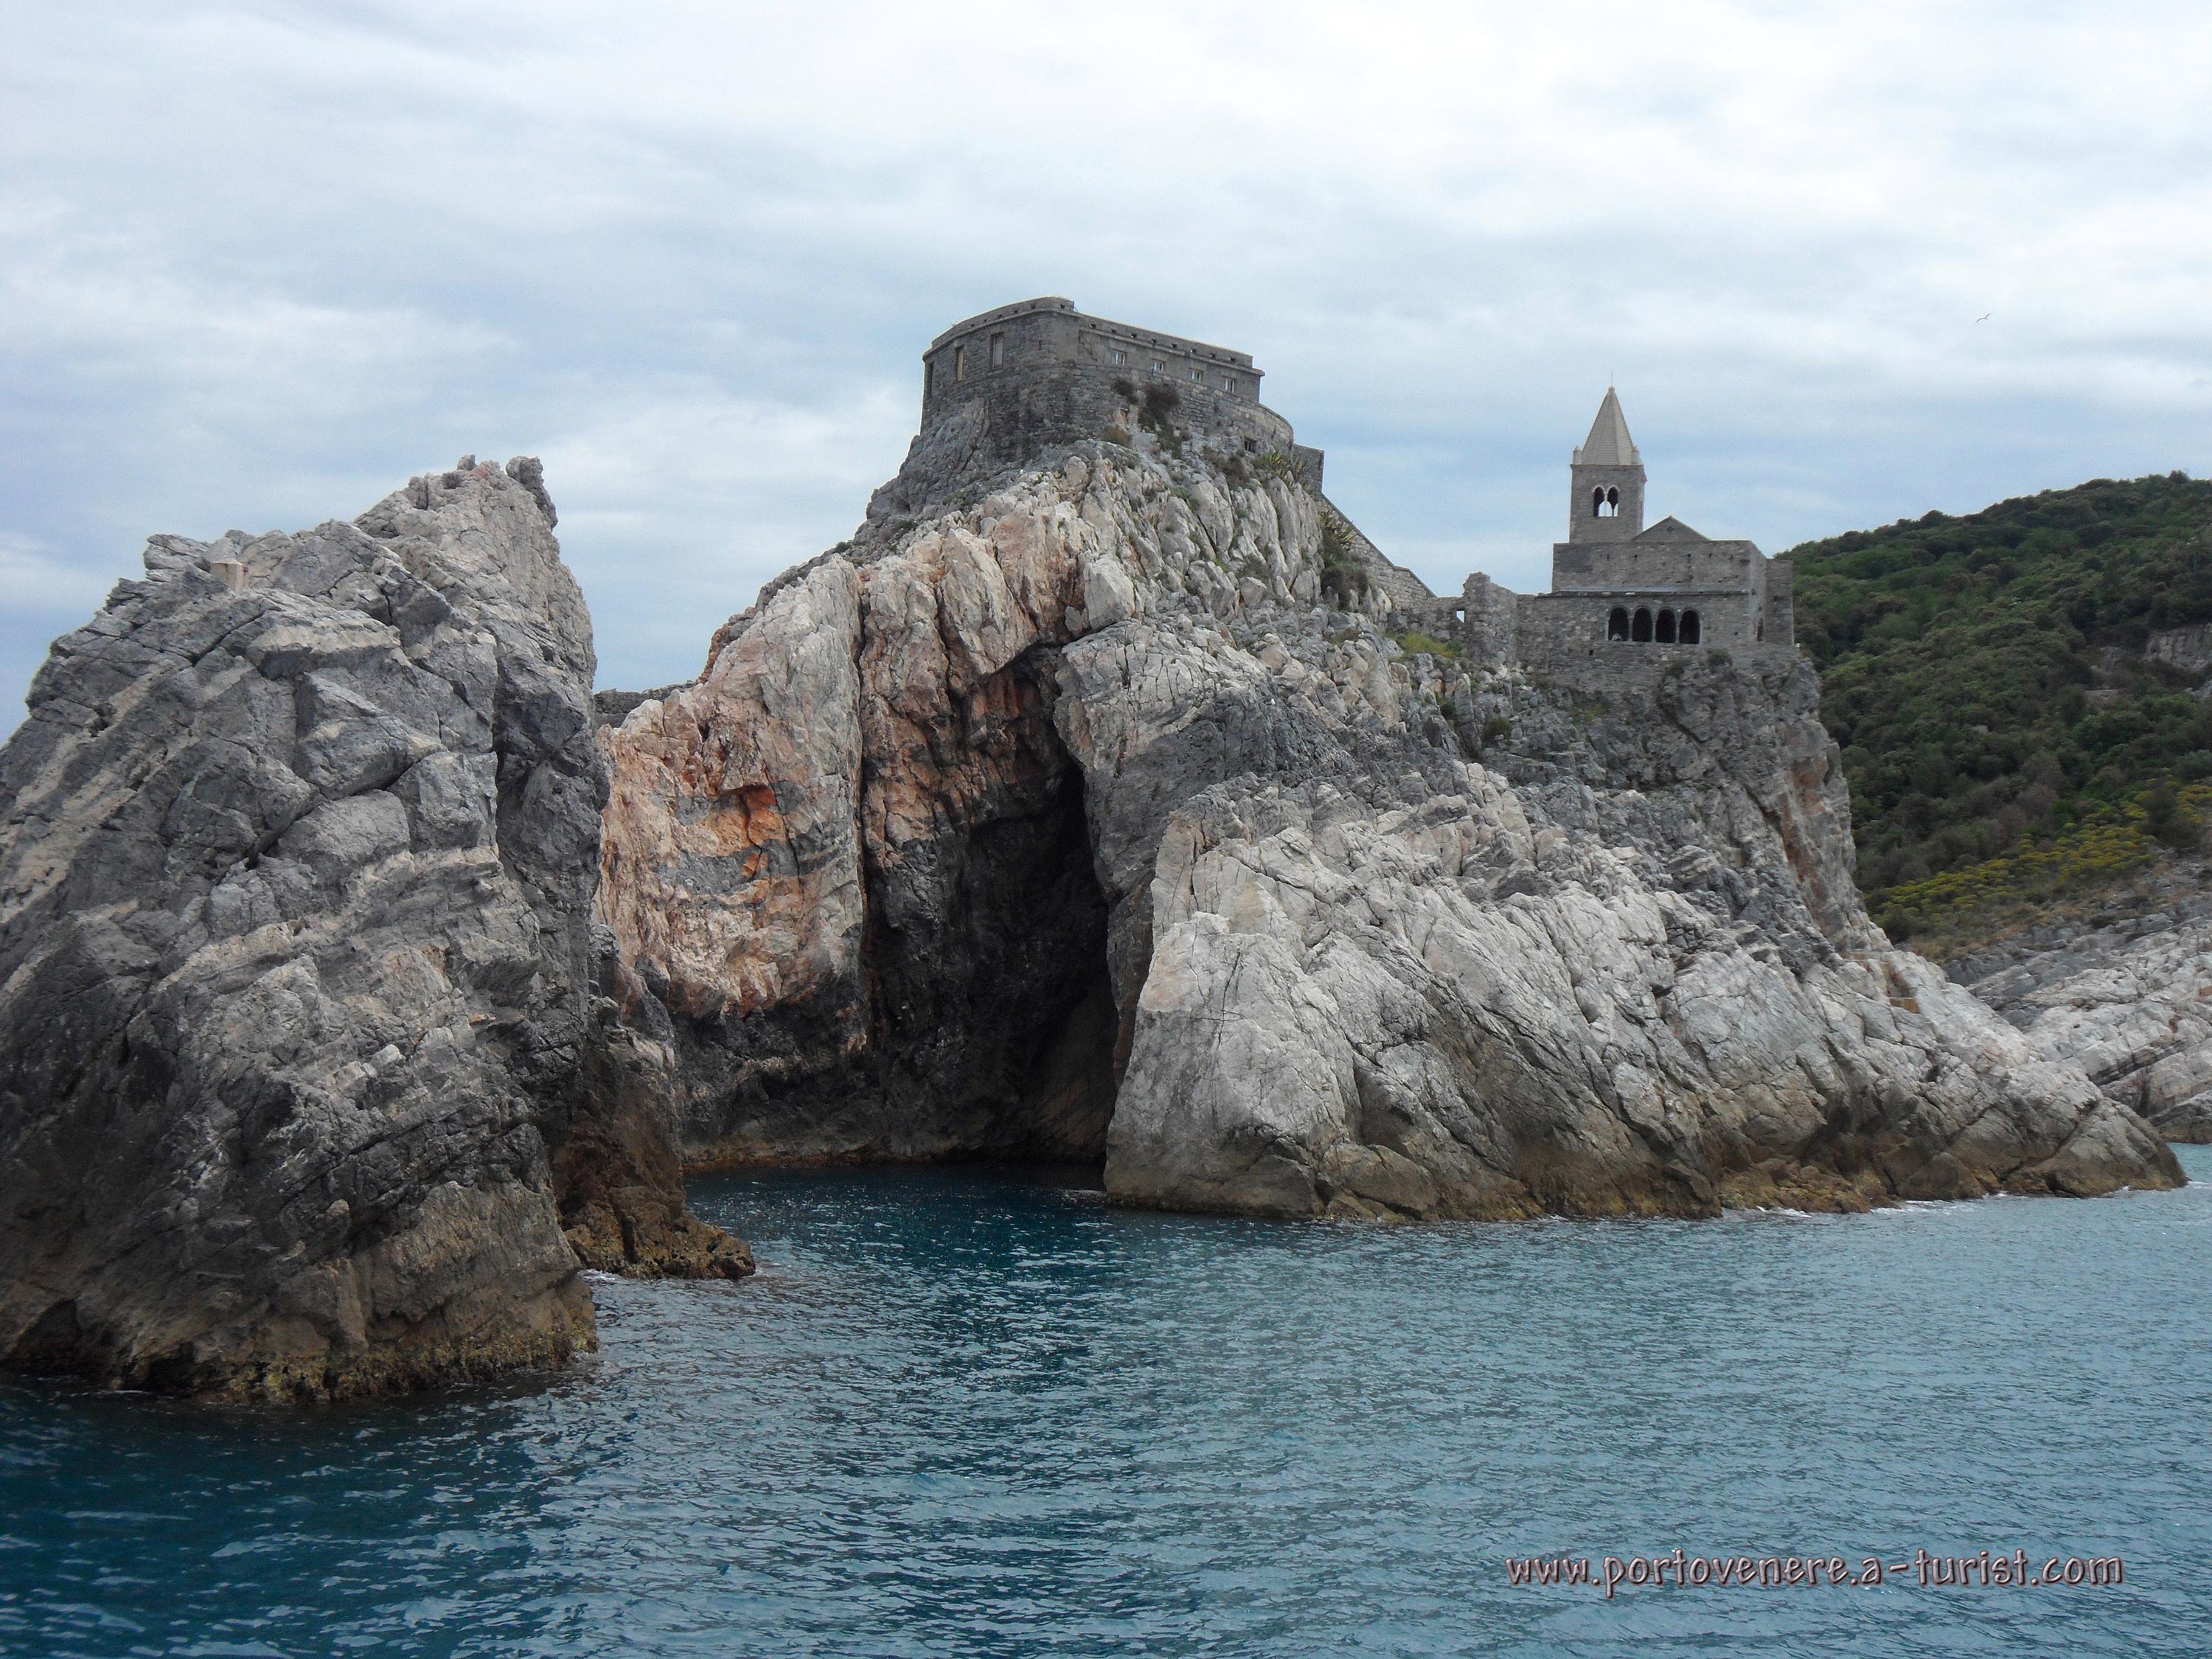 Portovenere - Church of San Pietro and the cave<br>3000x2250, 1.17 MB